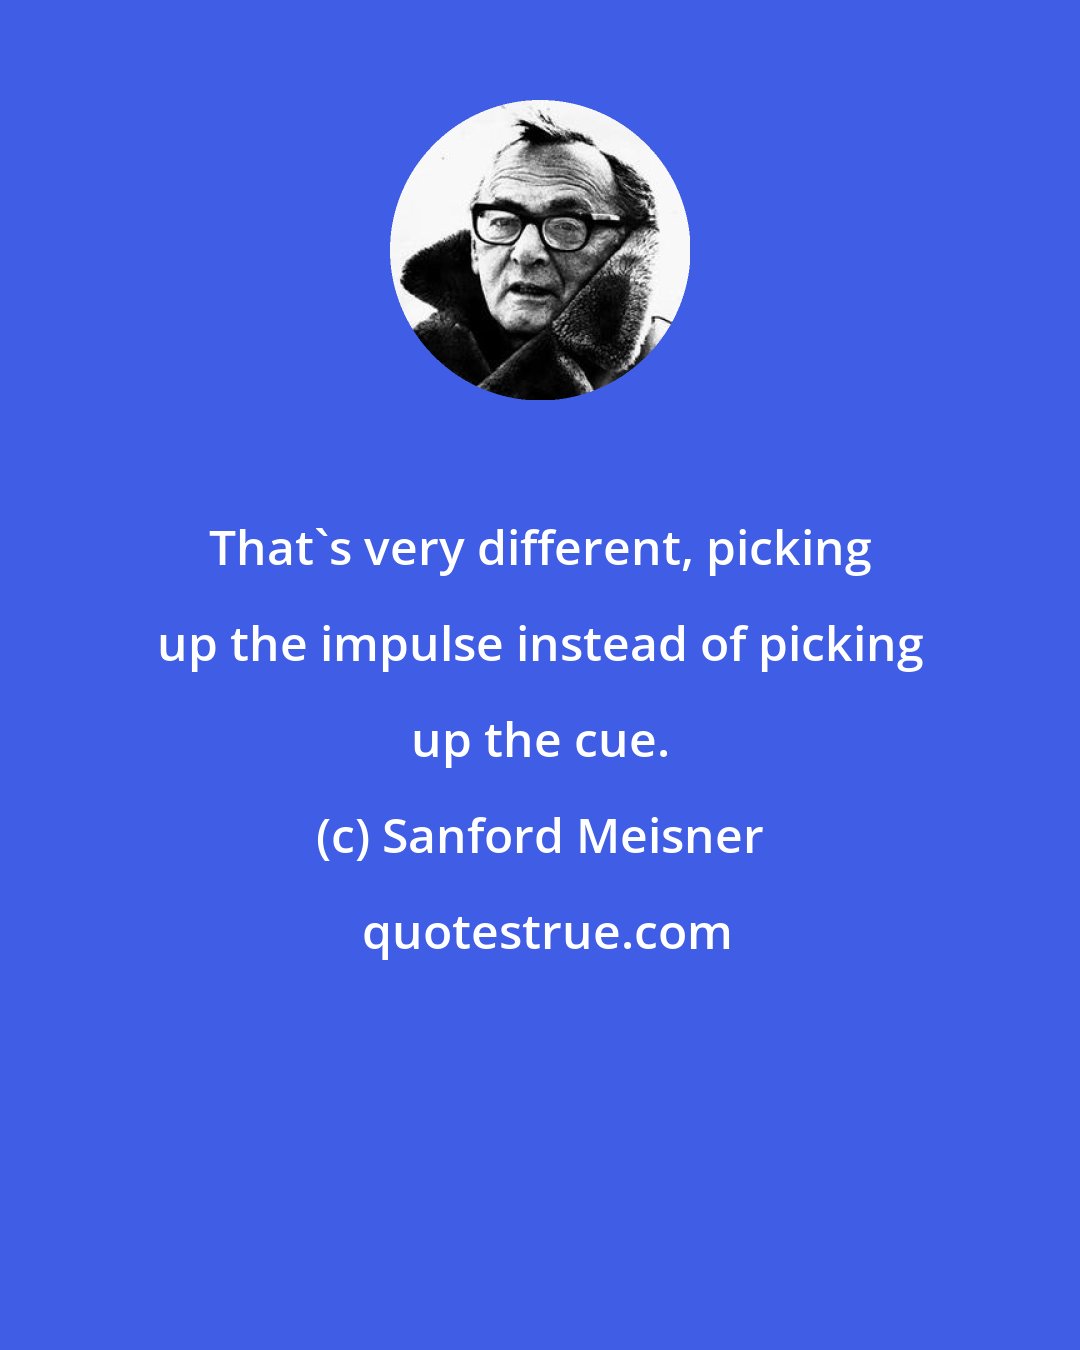 Sanford Meisner: That's very different, picking up the impulse instead of picking up the cue.